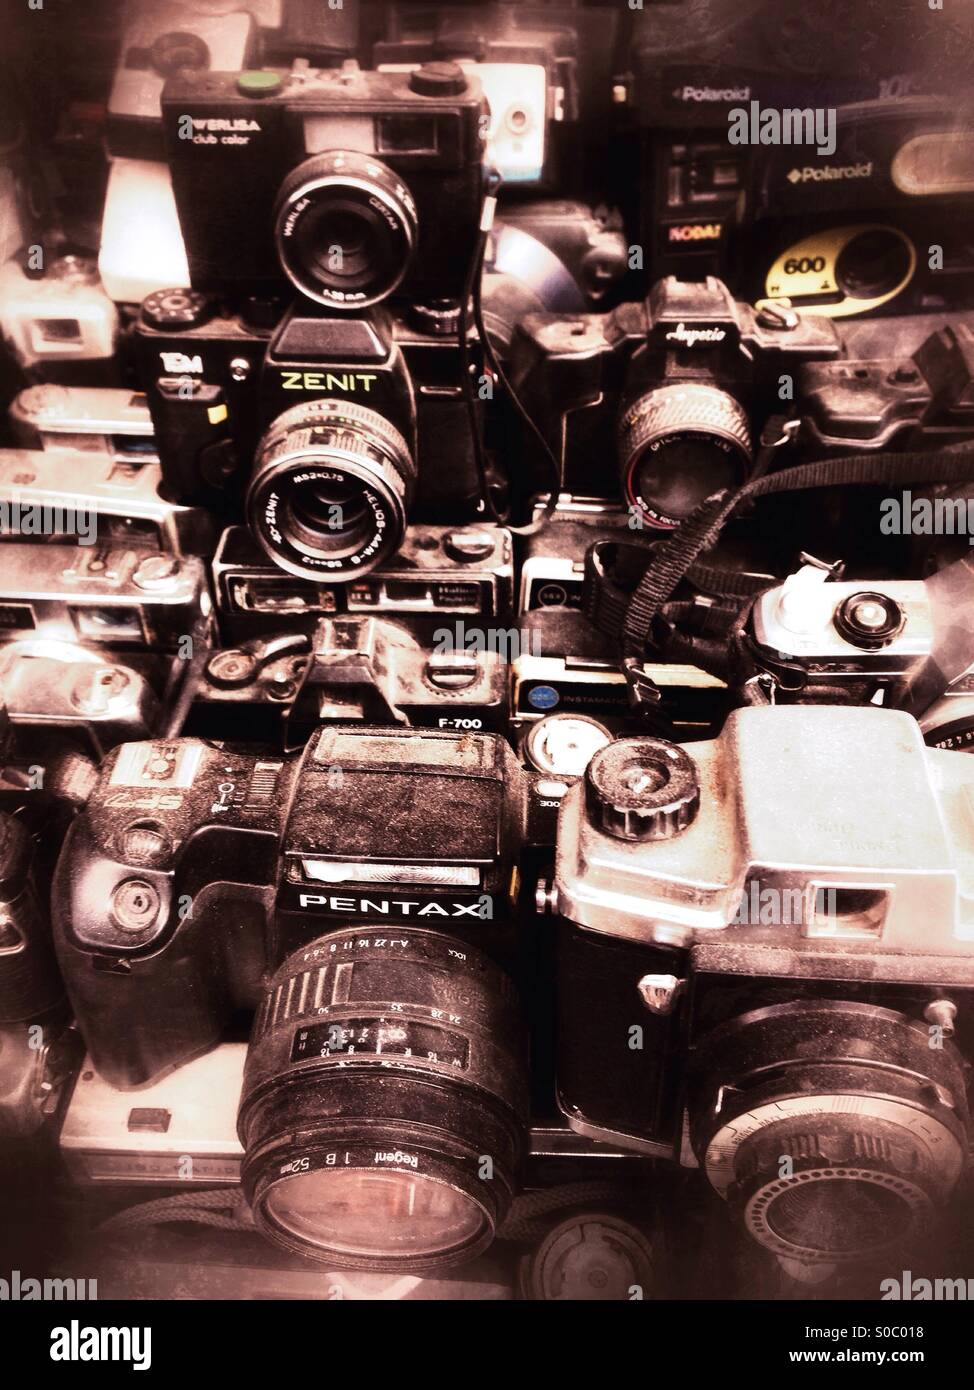 Old cameras for sale in a souk, Marrakech, Morocco. Stock Photo